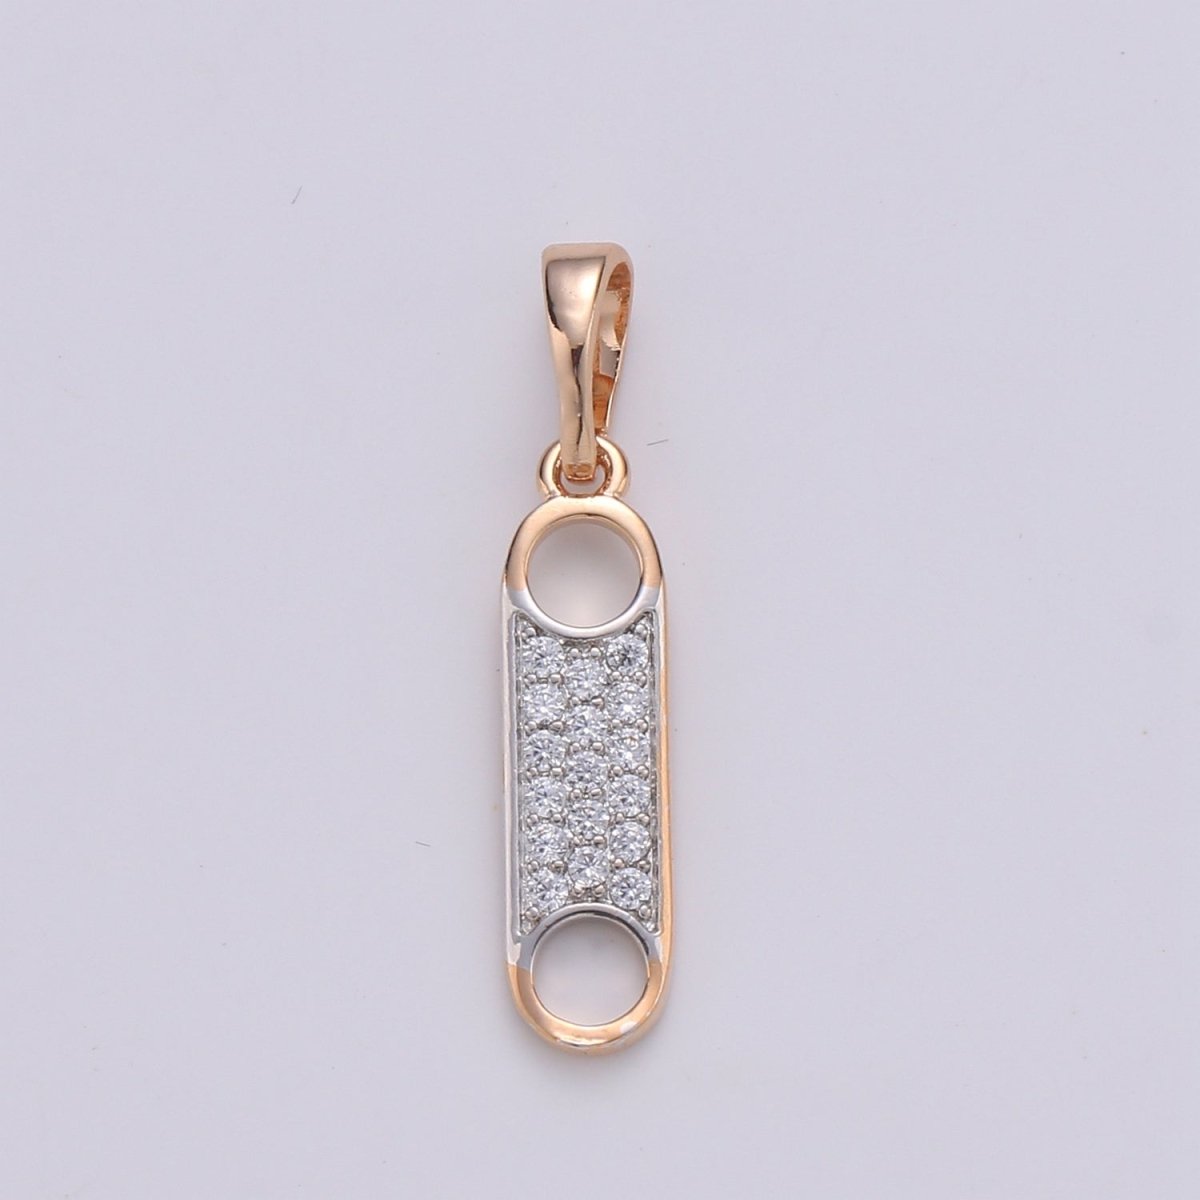 Zipper Charm Rose Gold filled Pendant Dangle Charm cubic zirconia Charm for Necklace Component, J-100 - DLUXCA